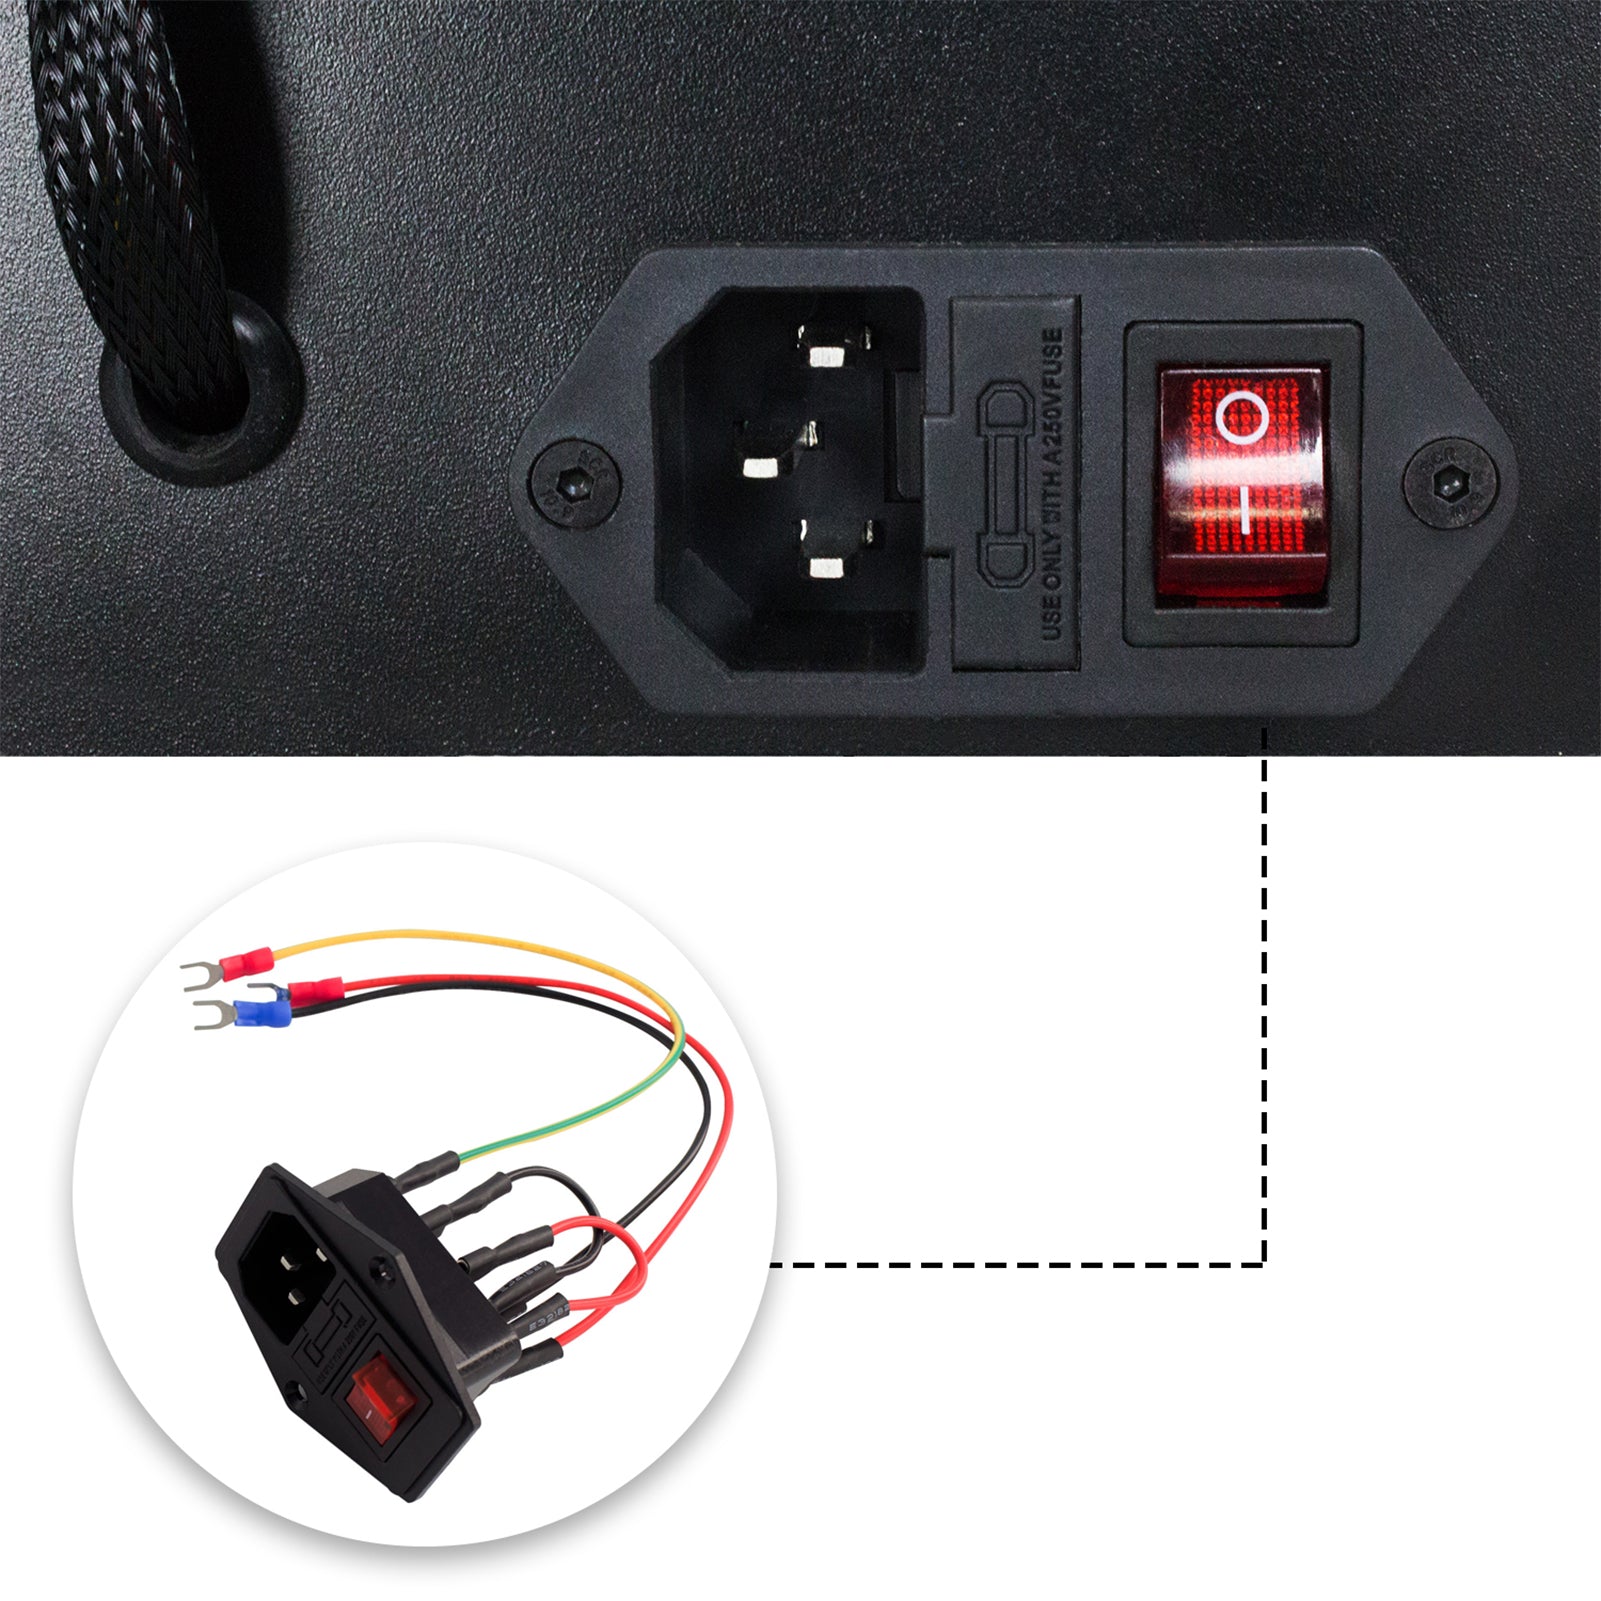 3D Printer Accessories Power Supply Switch Socket 10A 250V Rocker Switch with Fuse Cable U-Type Plug for 3D Printer